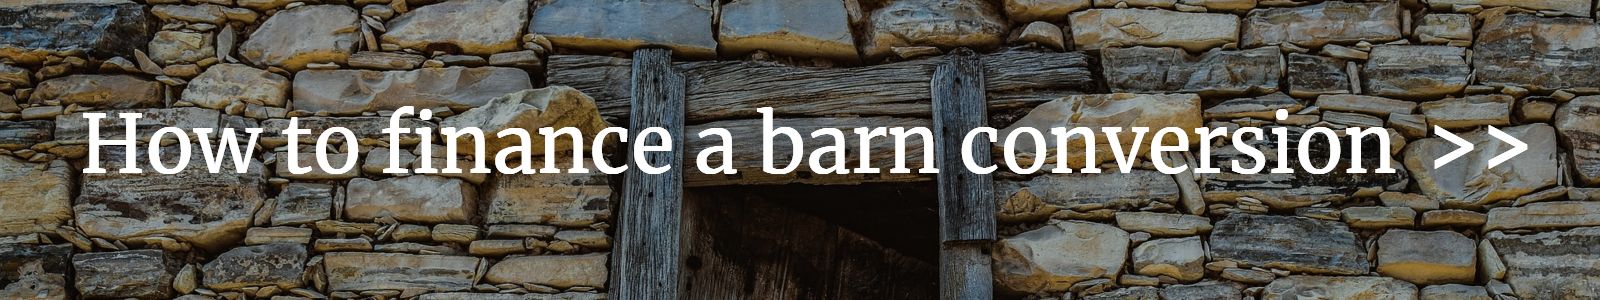 How-to-finance-a-barn-conversion